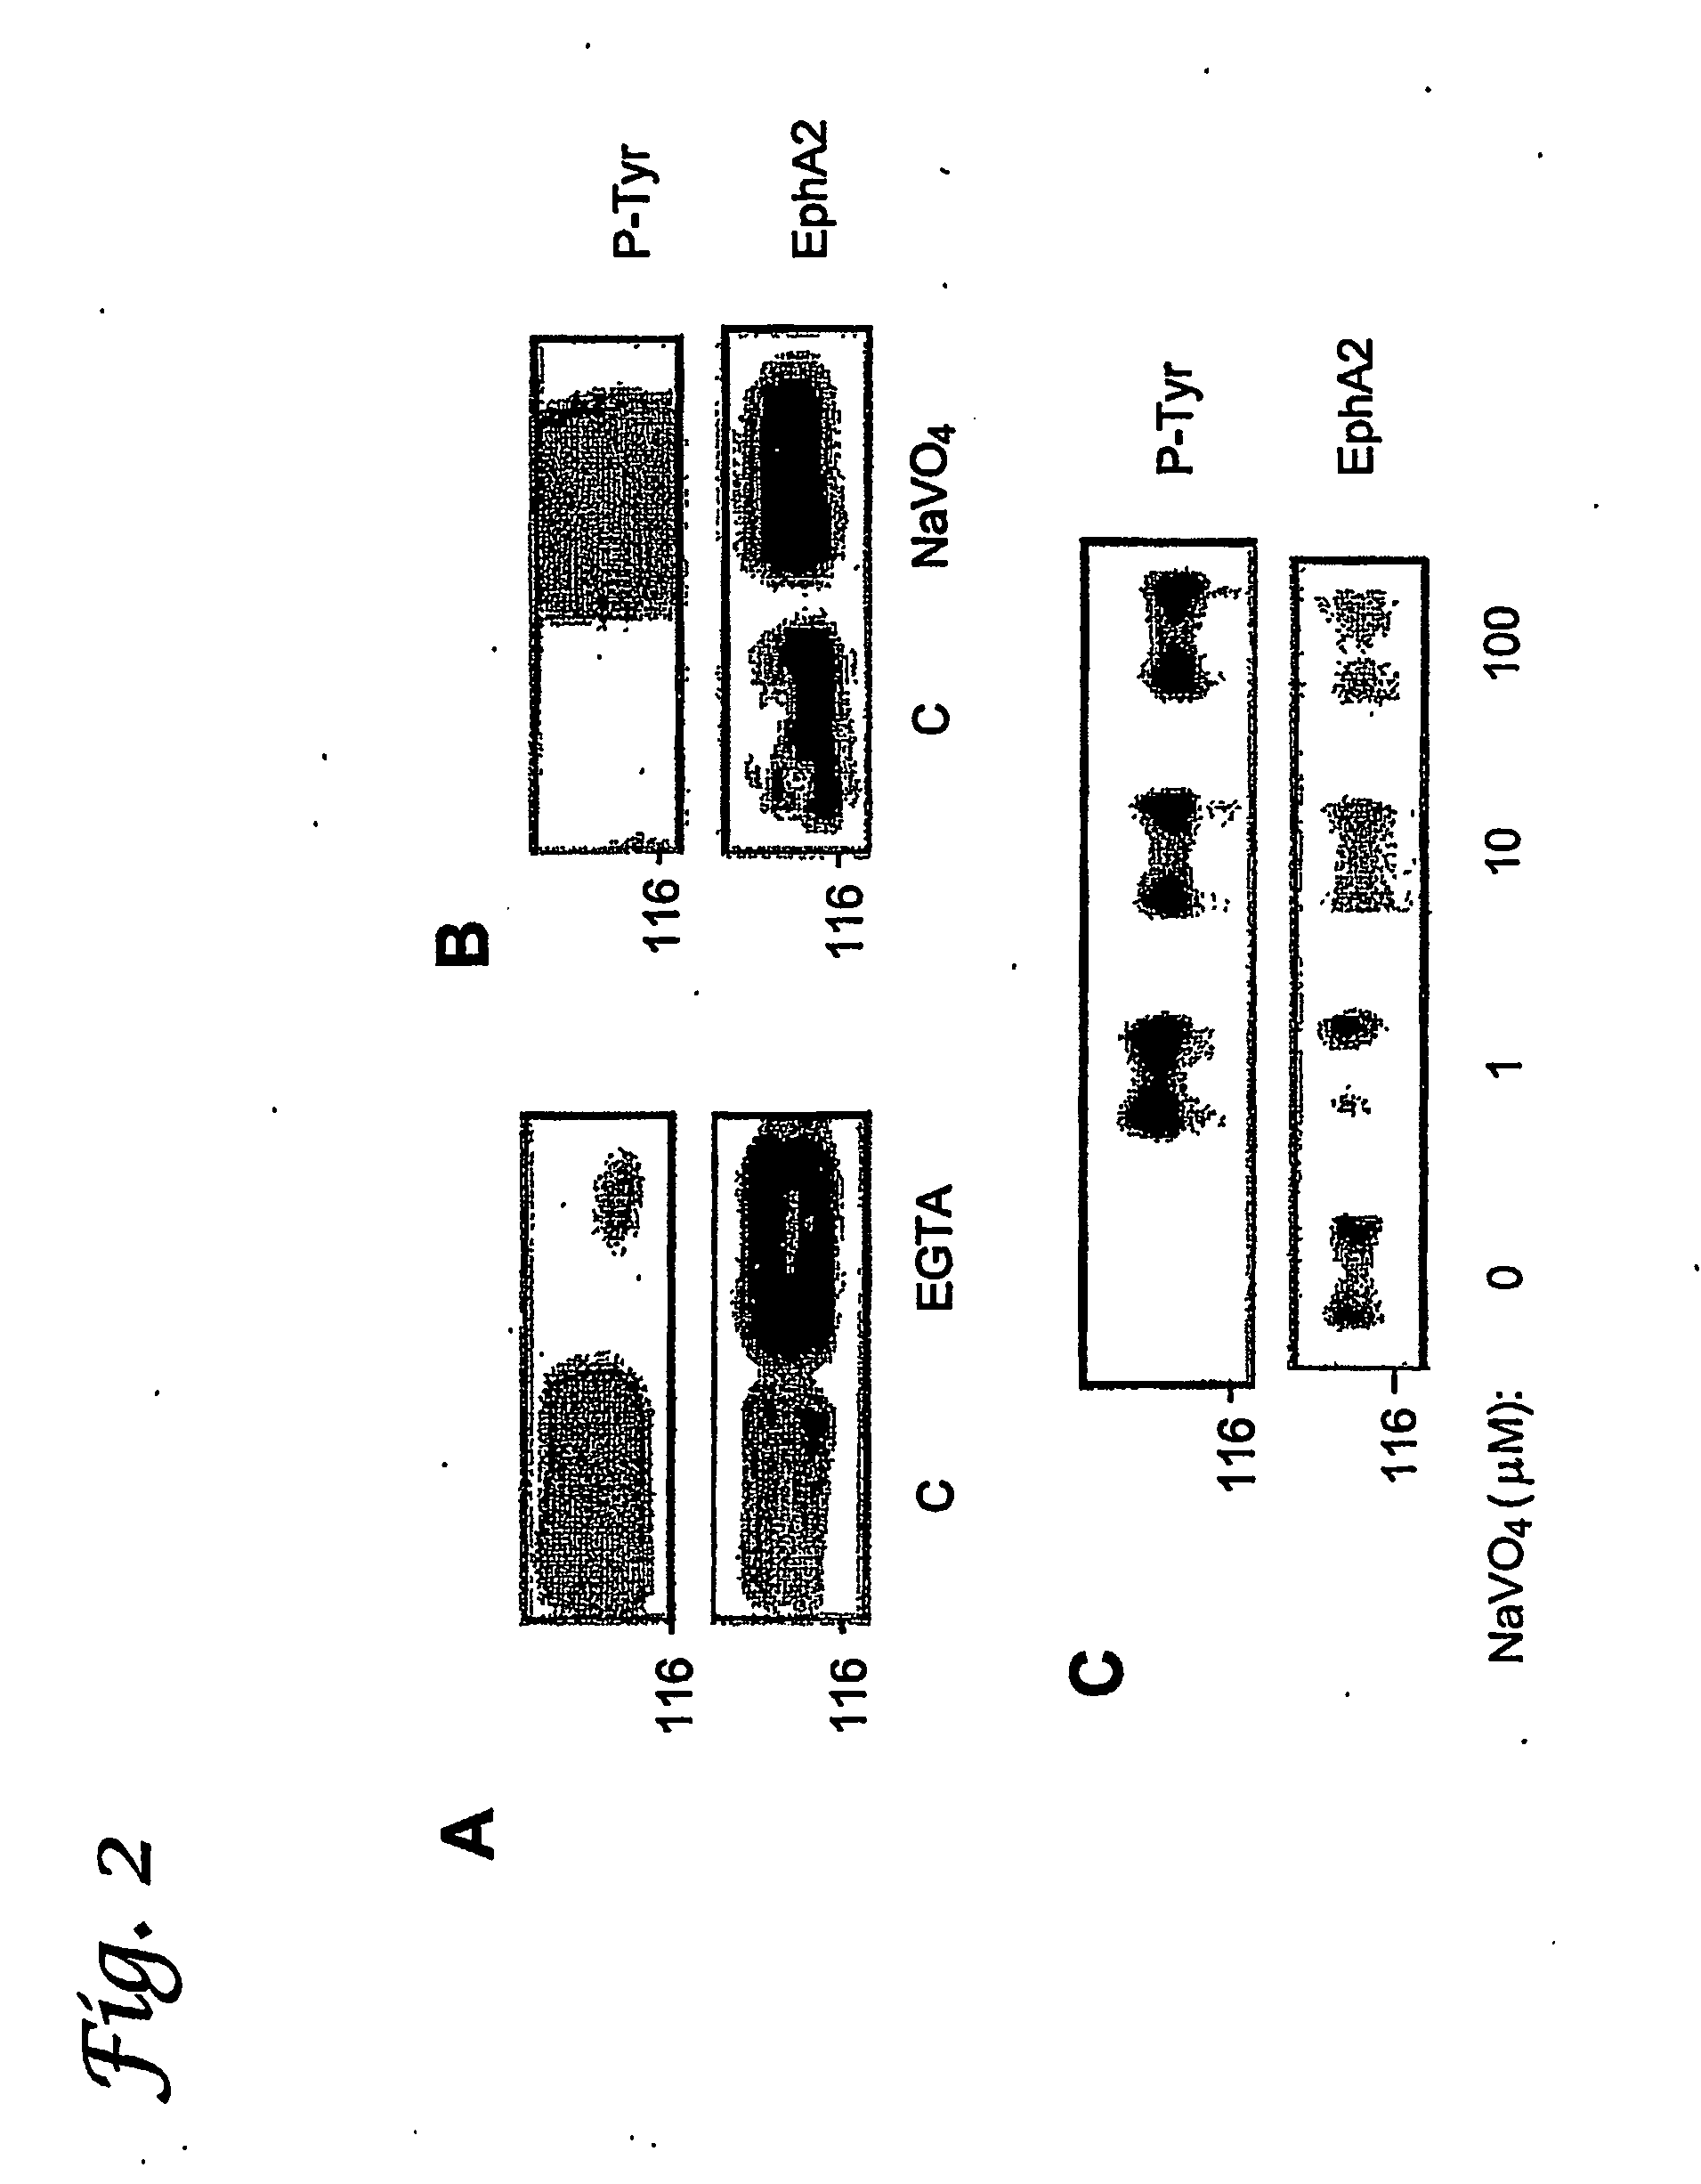 Low molecular weight protein tyrosine phosphatase (lmw-ptp) as a diagnostic and therapeutic target